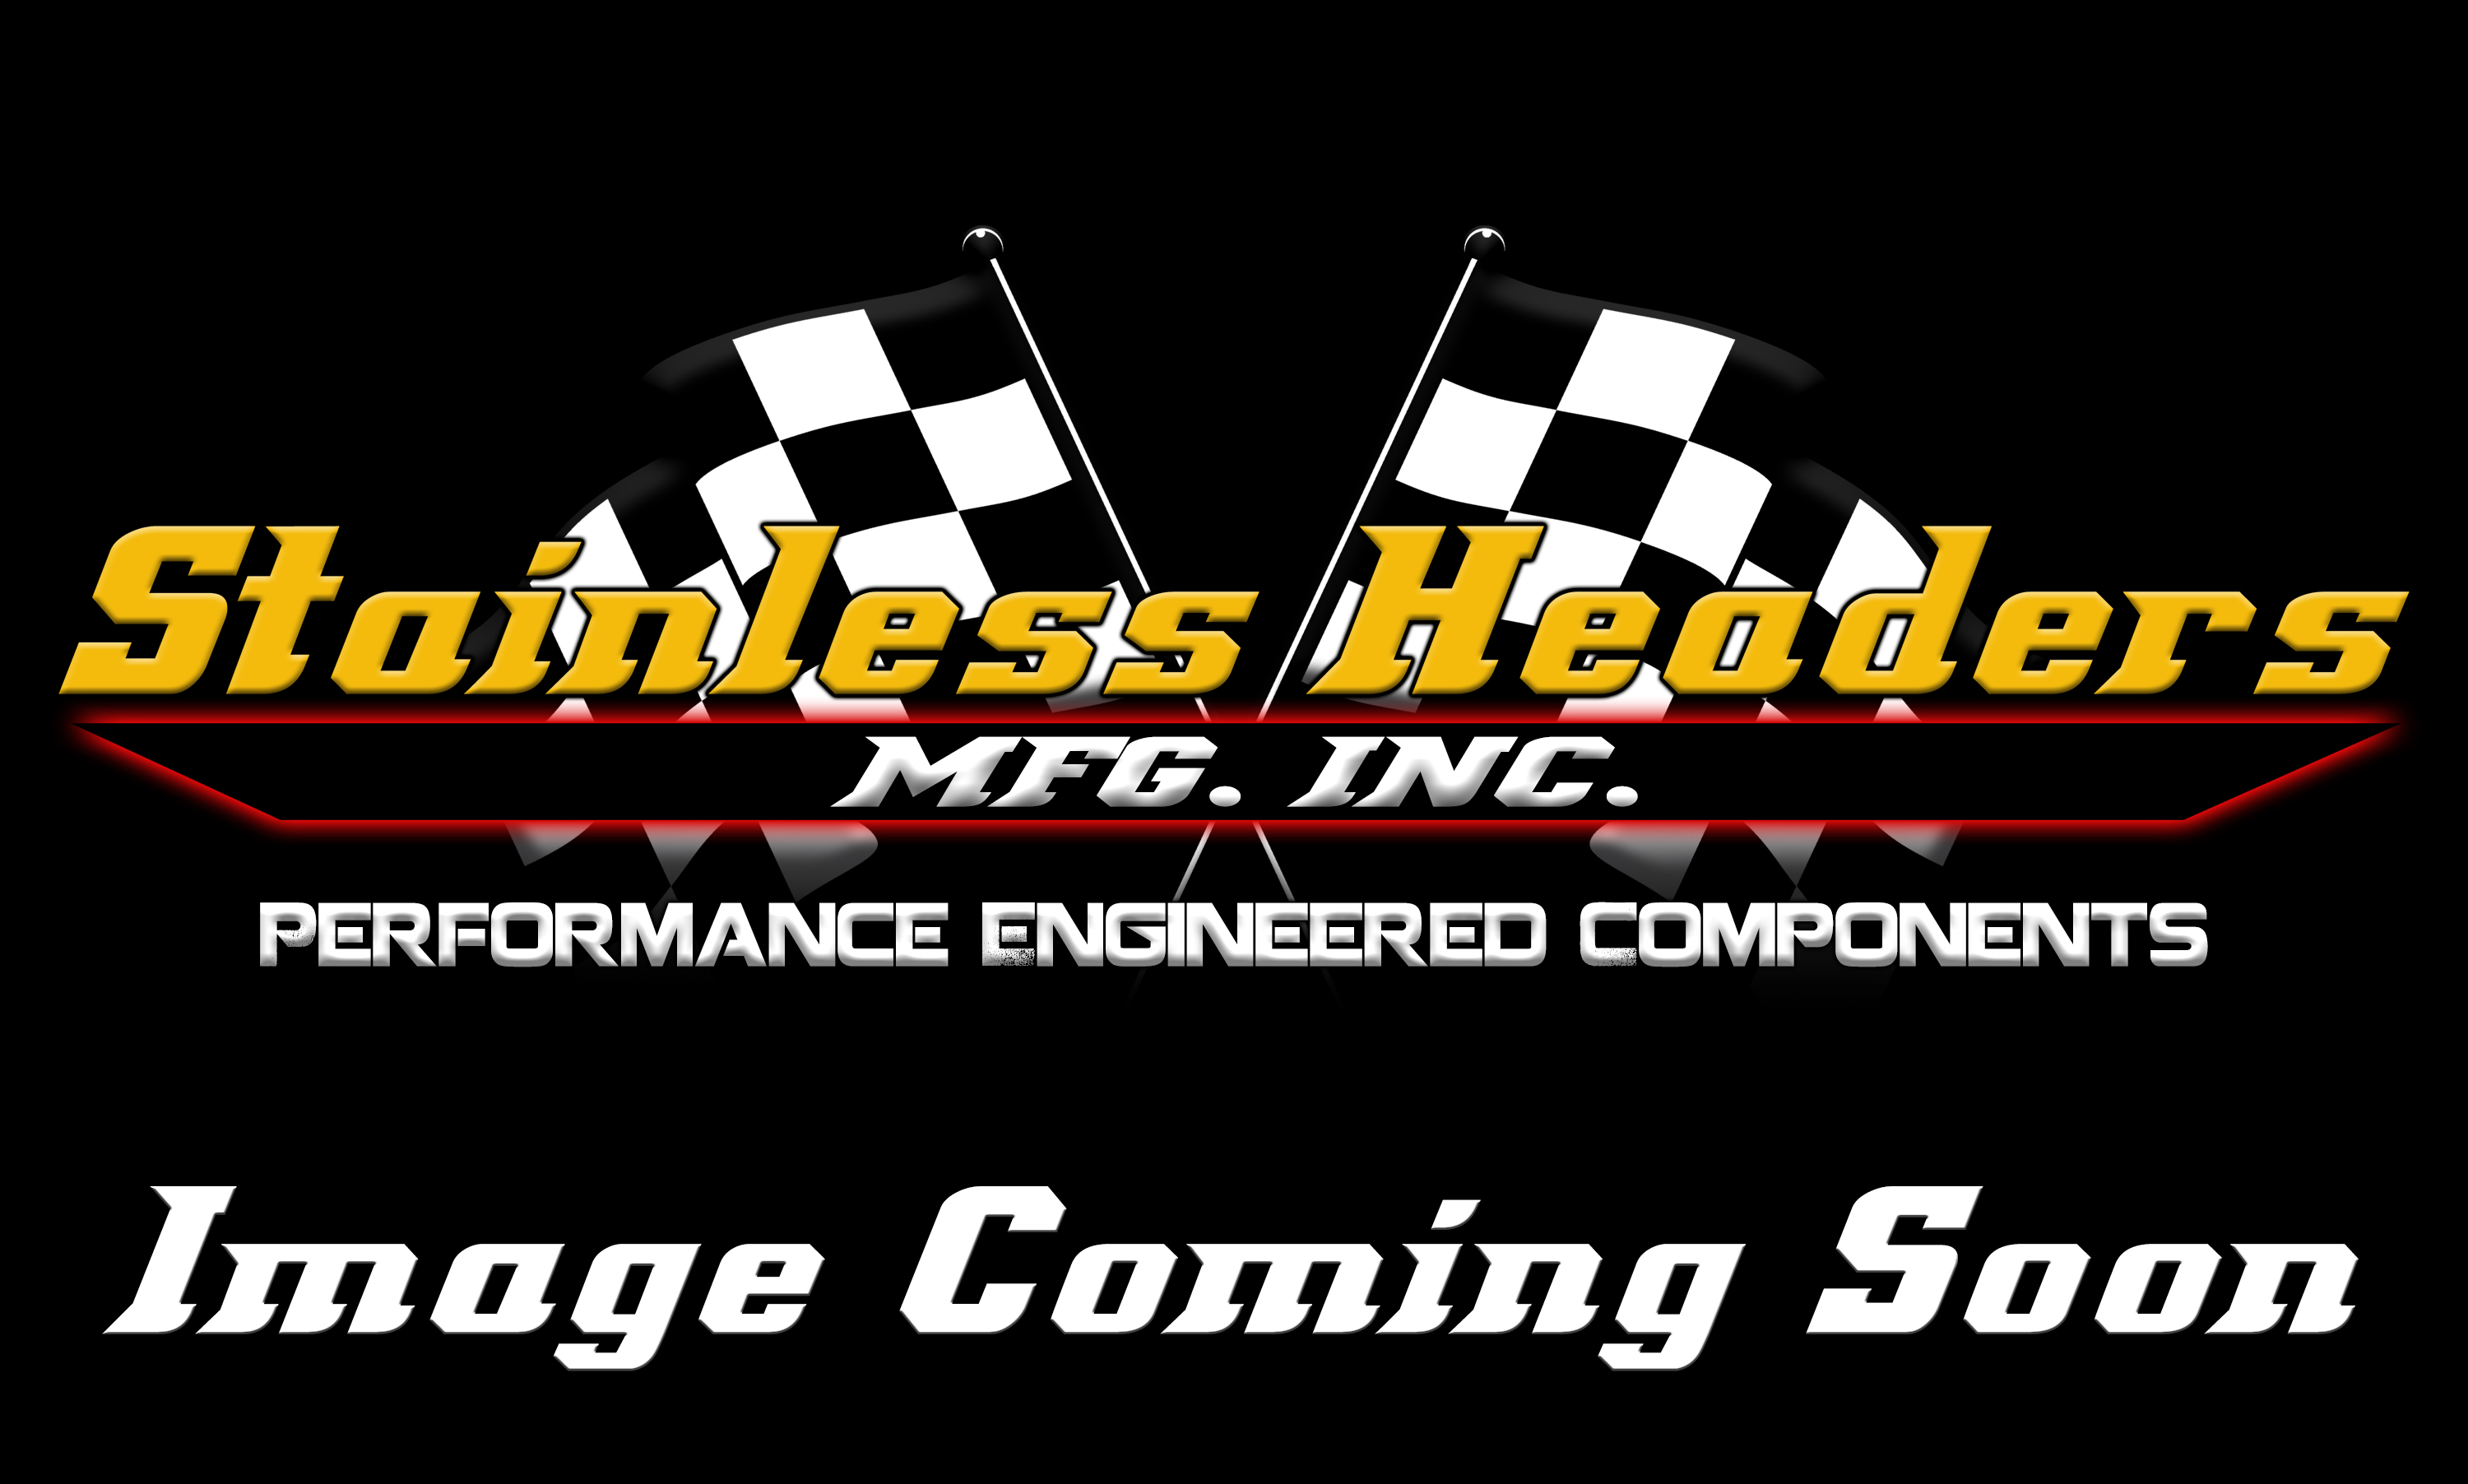 CompTurbo Technologies - CTR4518R-8388 Mid Frame Oil-Less 3.0 Turbocharger (1500 HP) - Image 1